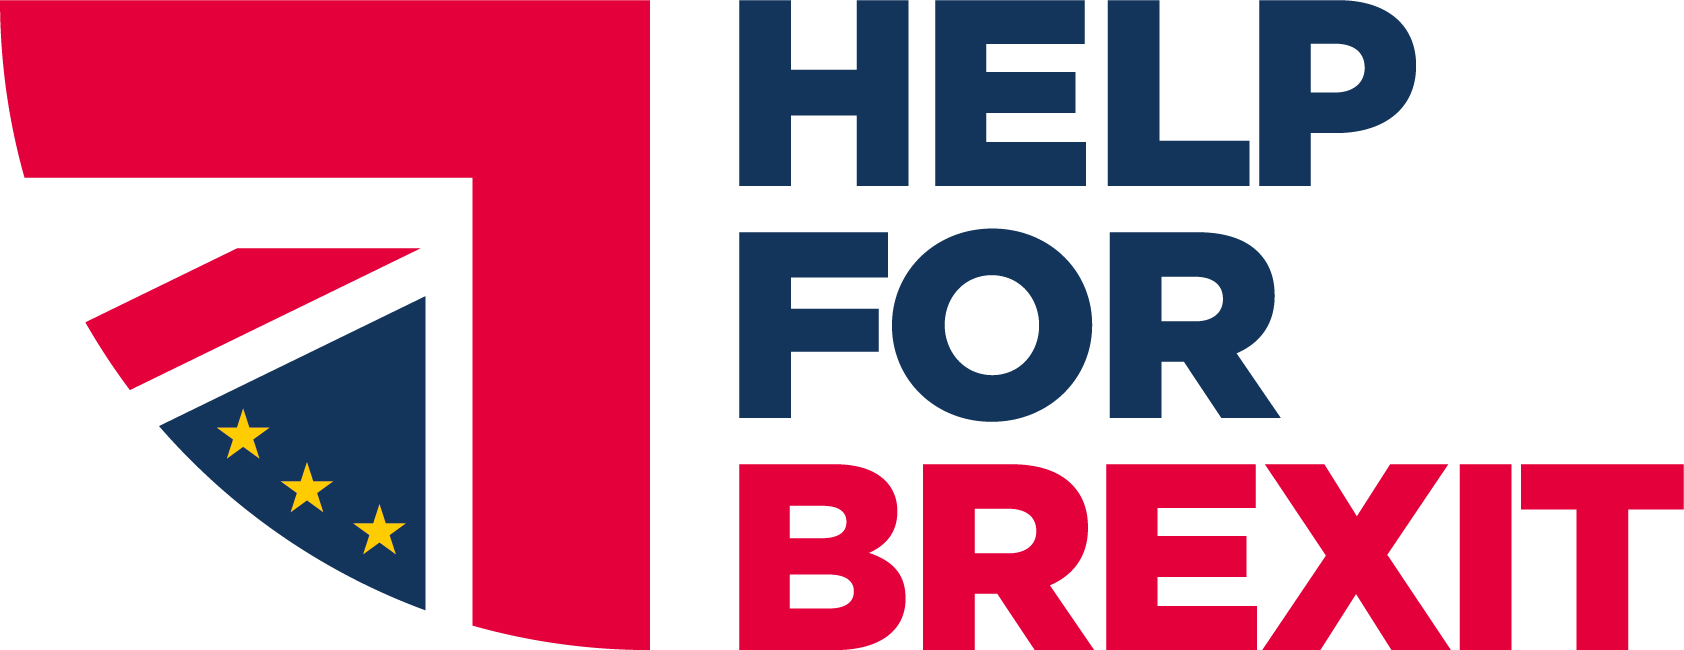 Help for brexit logo